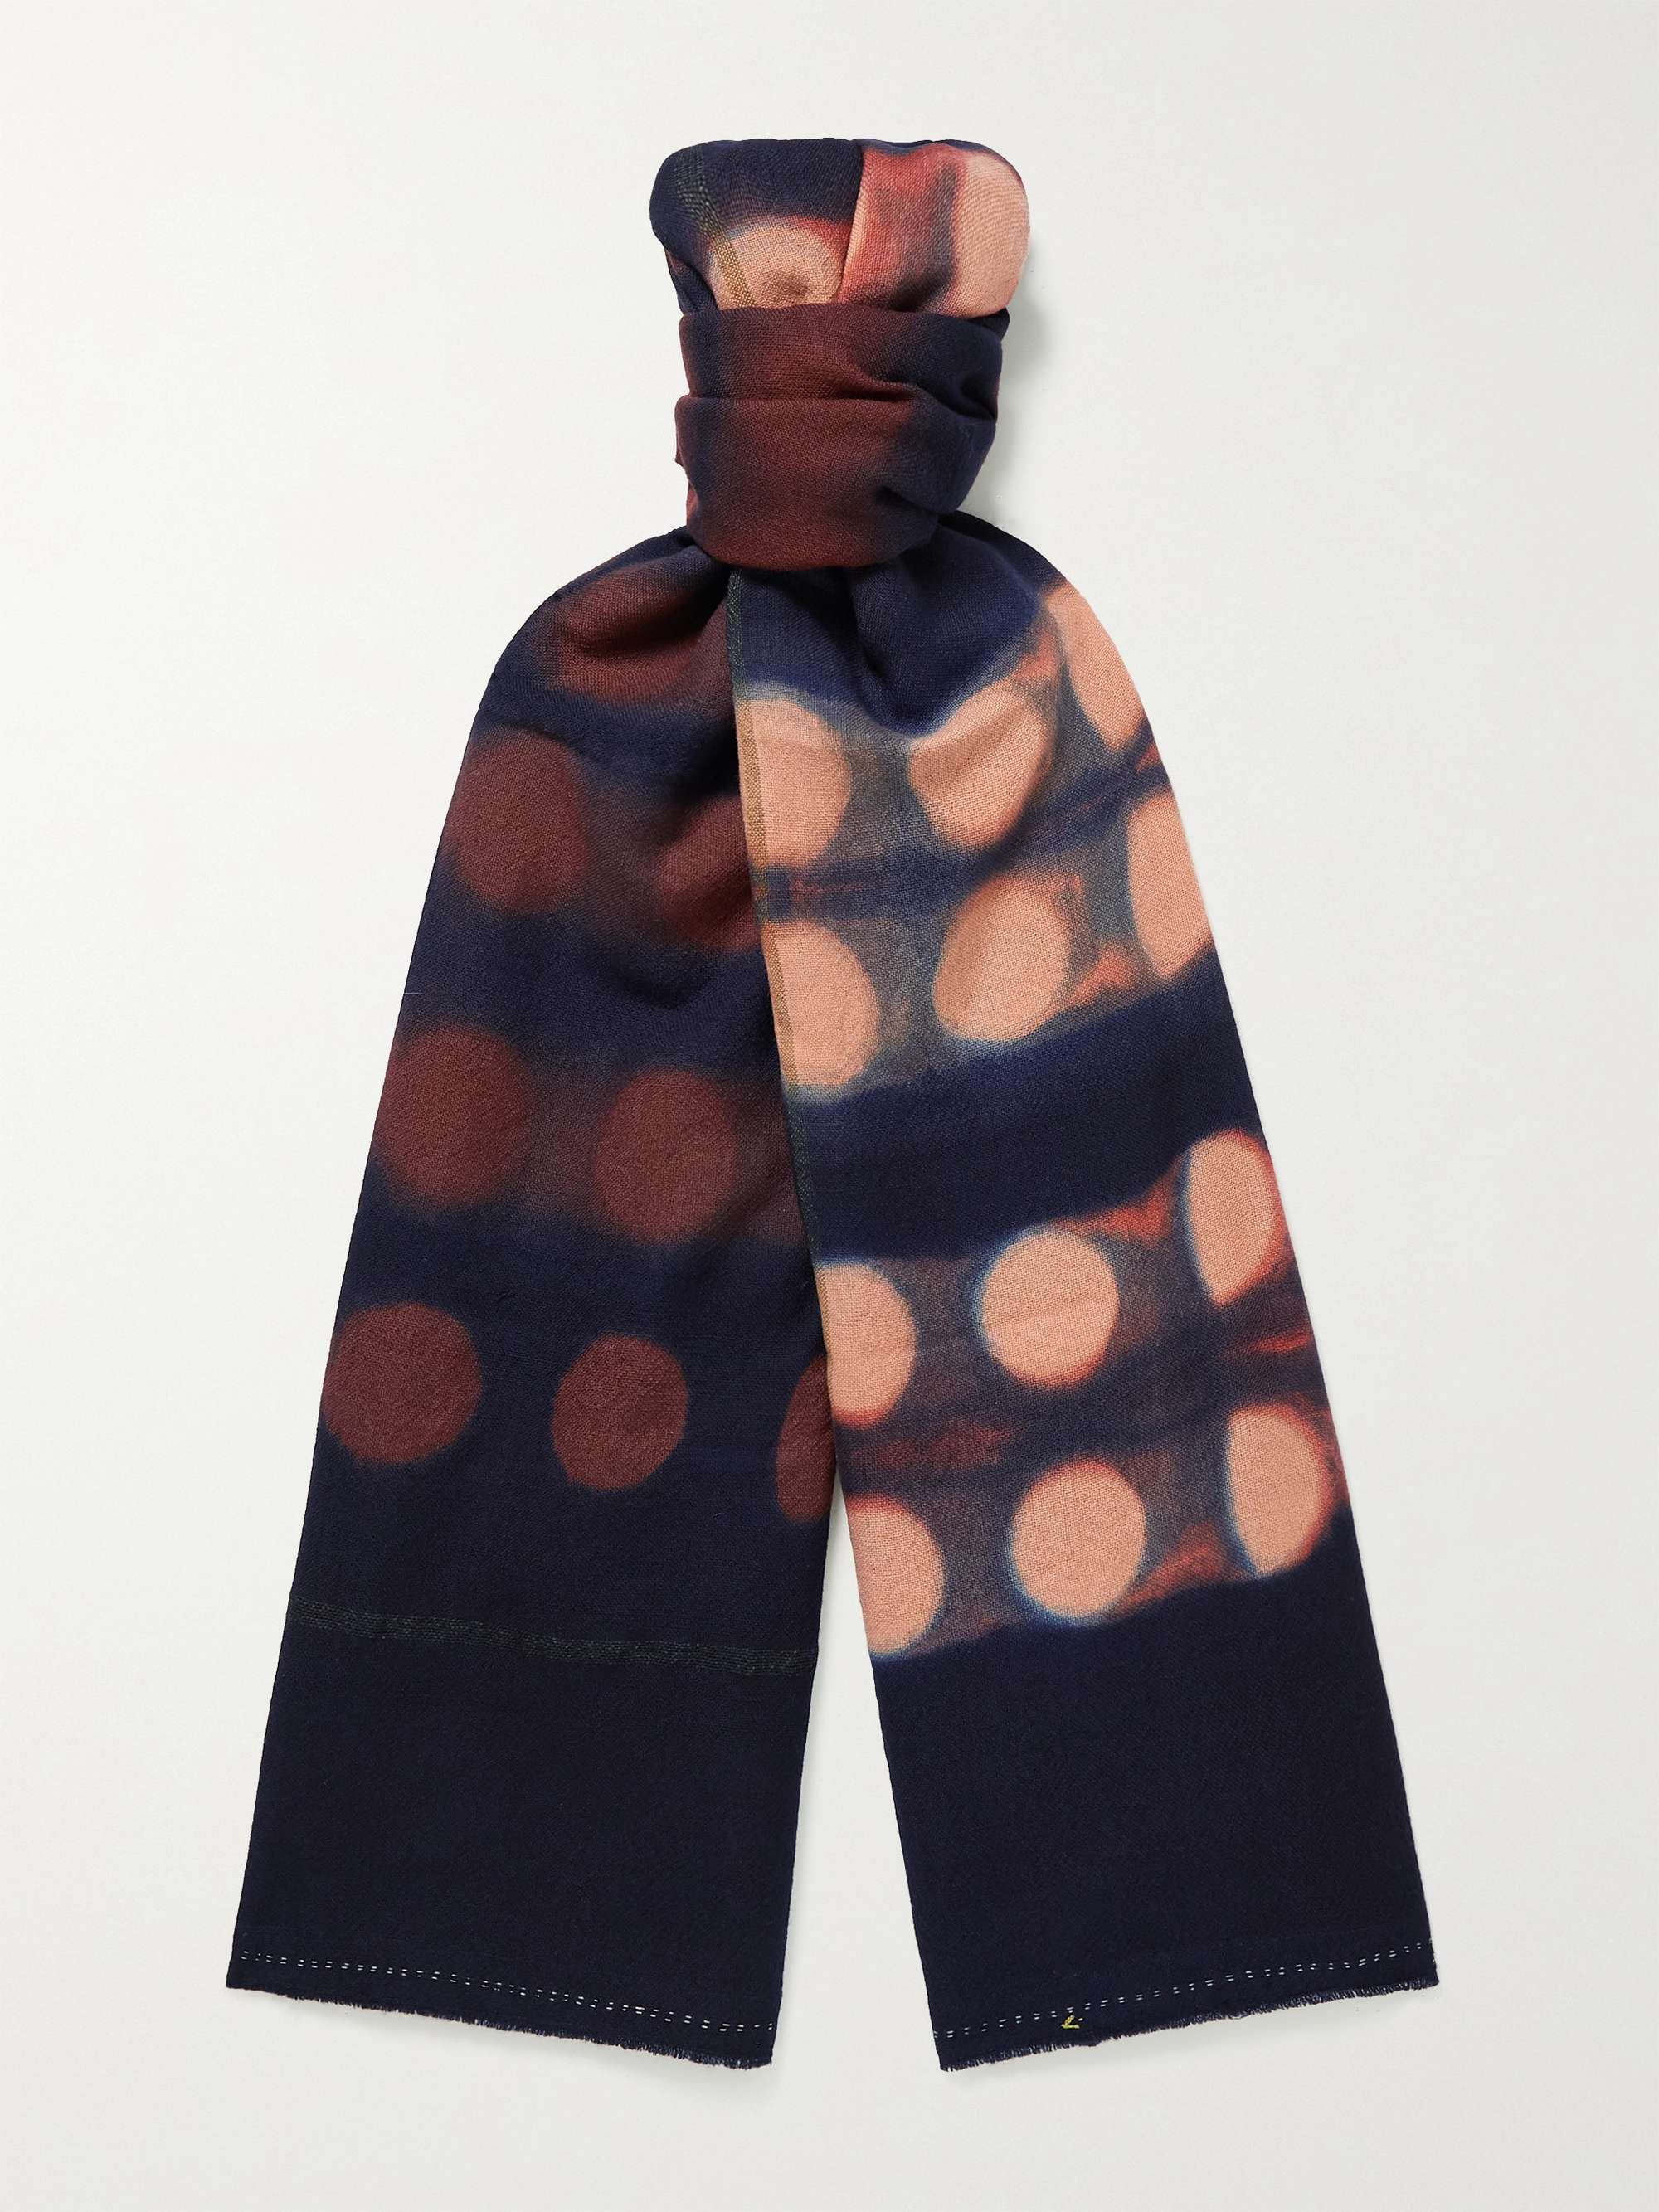 11.11/ELEVEN ELEVEN Tie-Dyed Wool Scarf